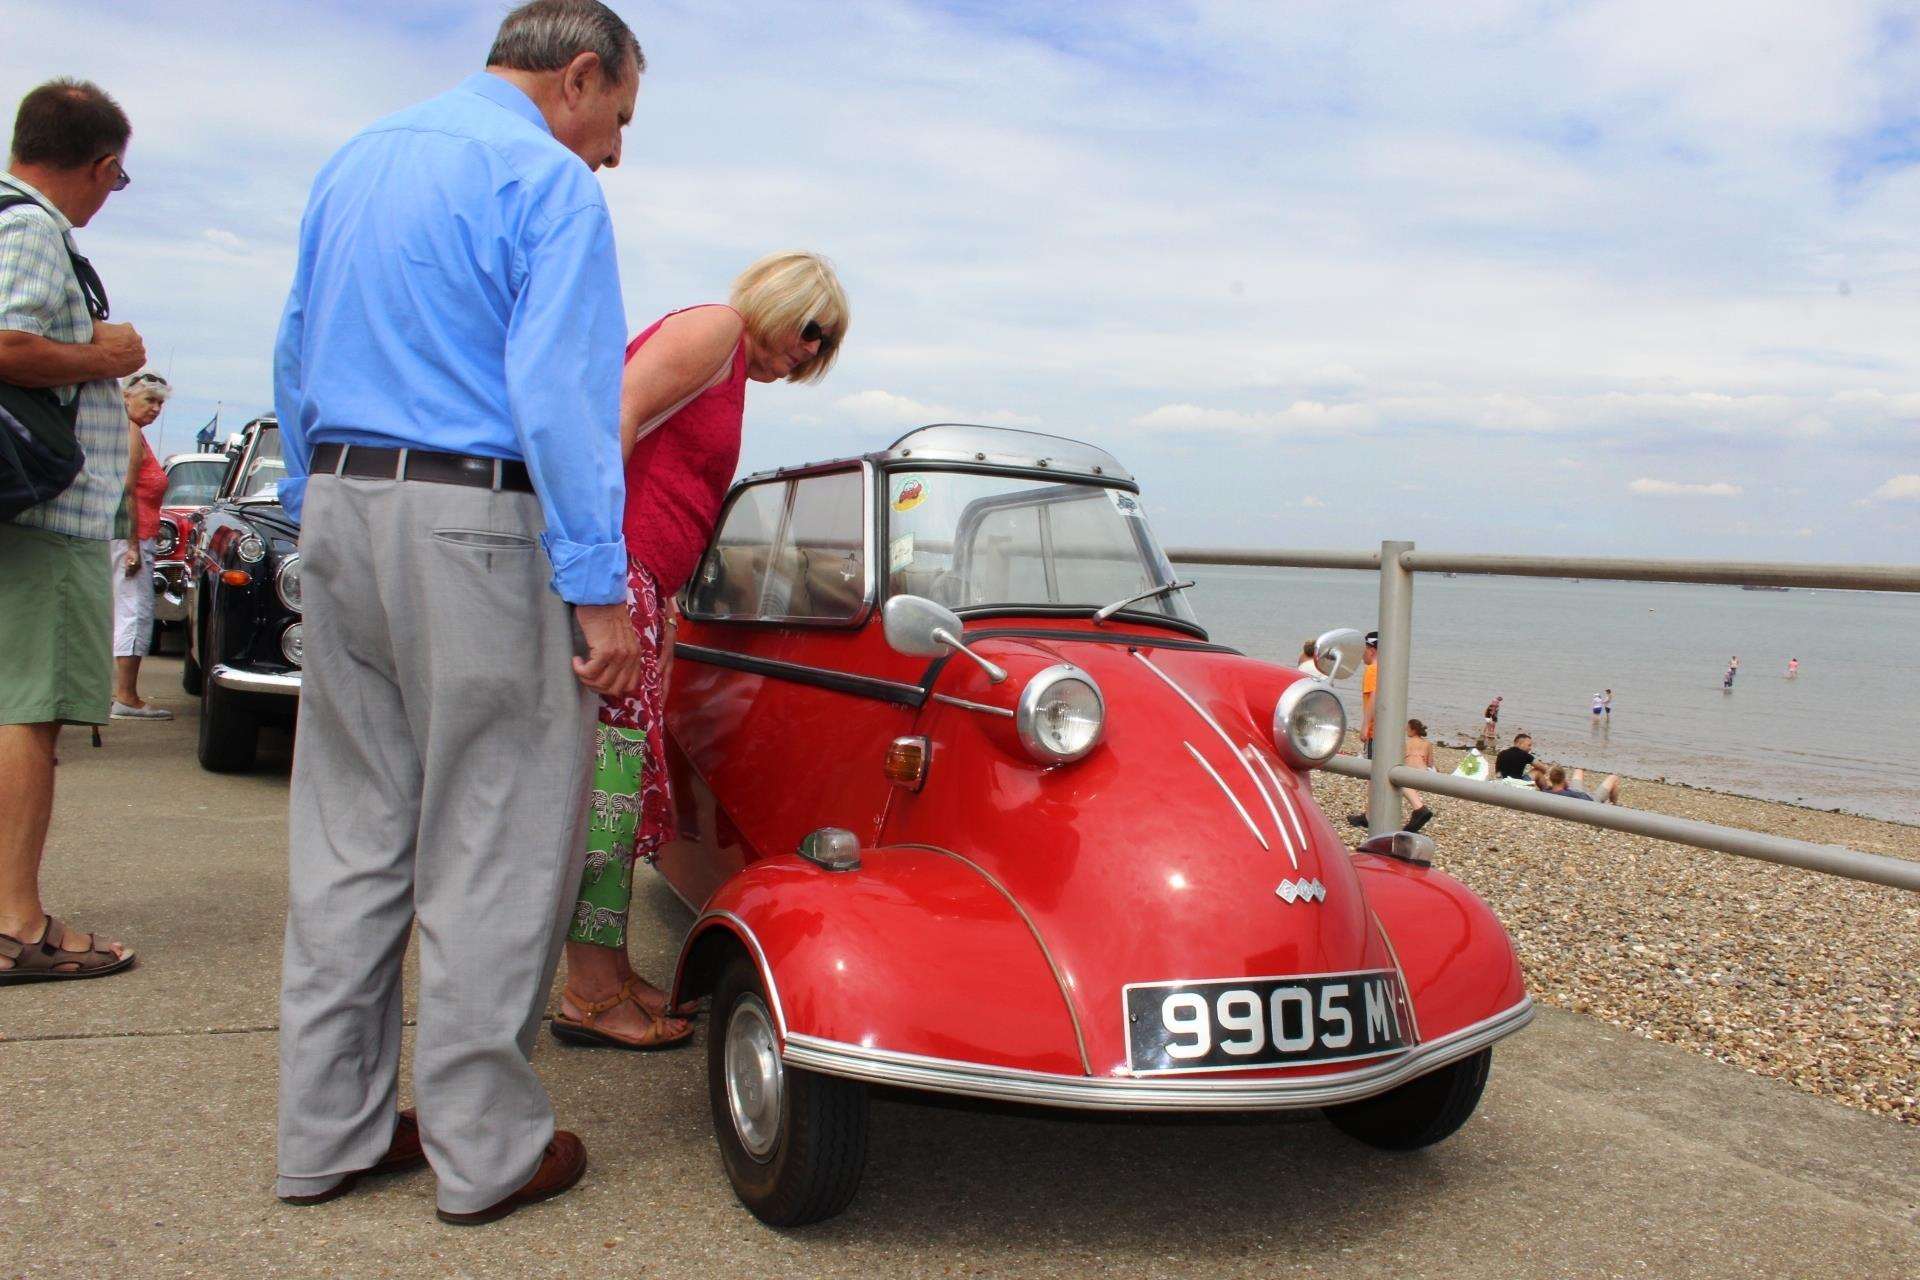 One of the smallest cars, a Messerschmitt "bubble" car, was one of the biggest draws on the Sheppey seafront at Minster Leas on Sunday (3206595)